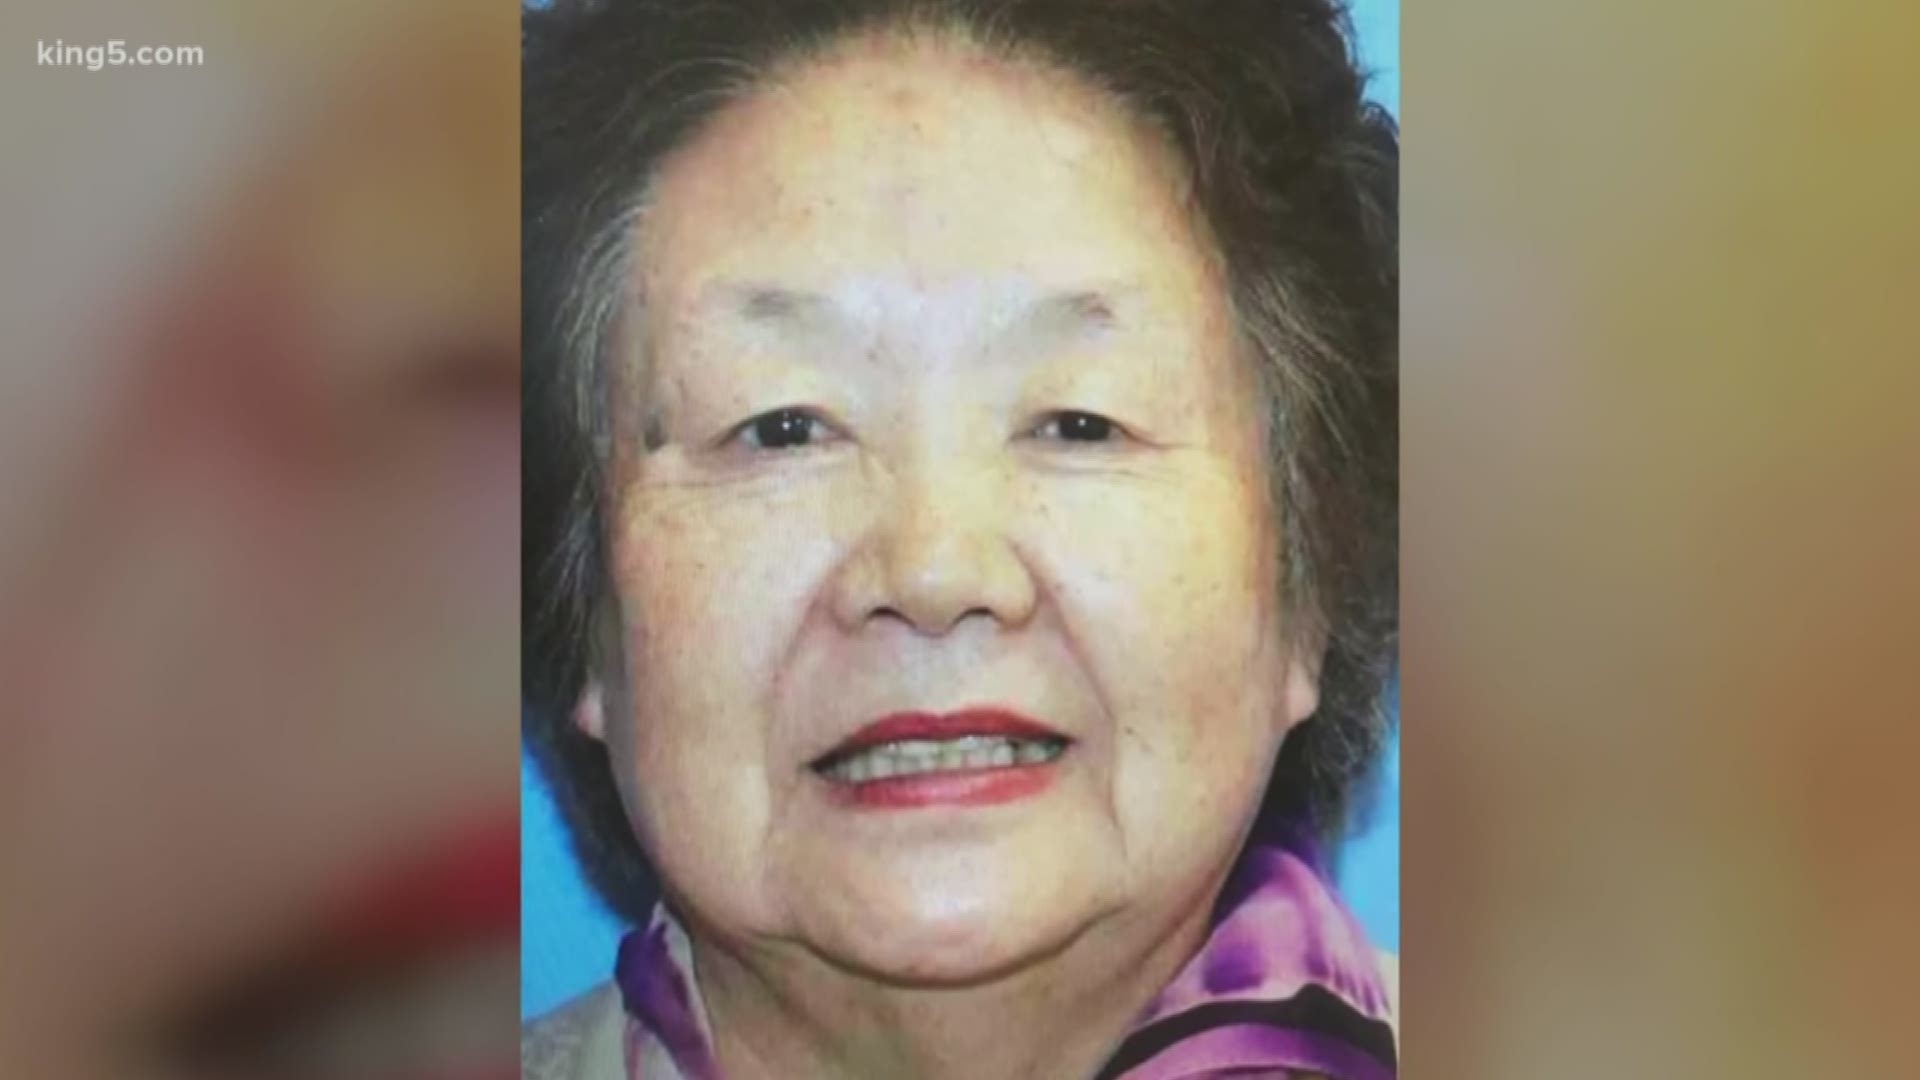 Authorities are searching for a 74-year-old woman named Jung VanAtta who disappeared while picking mushrooms east of Vancouver, Washington.